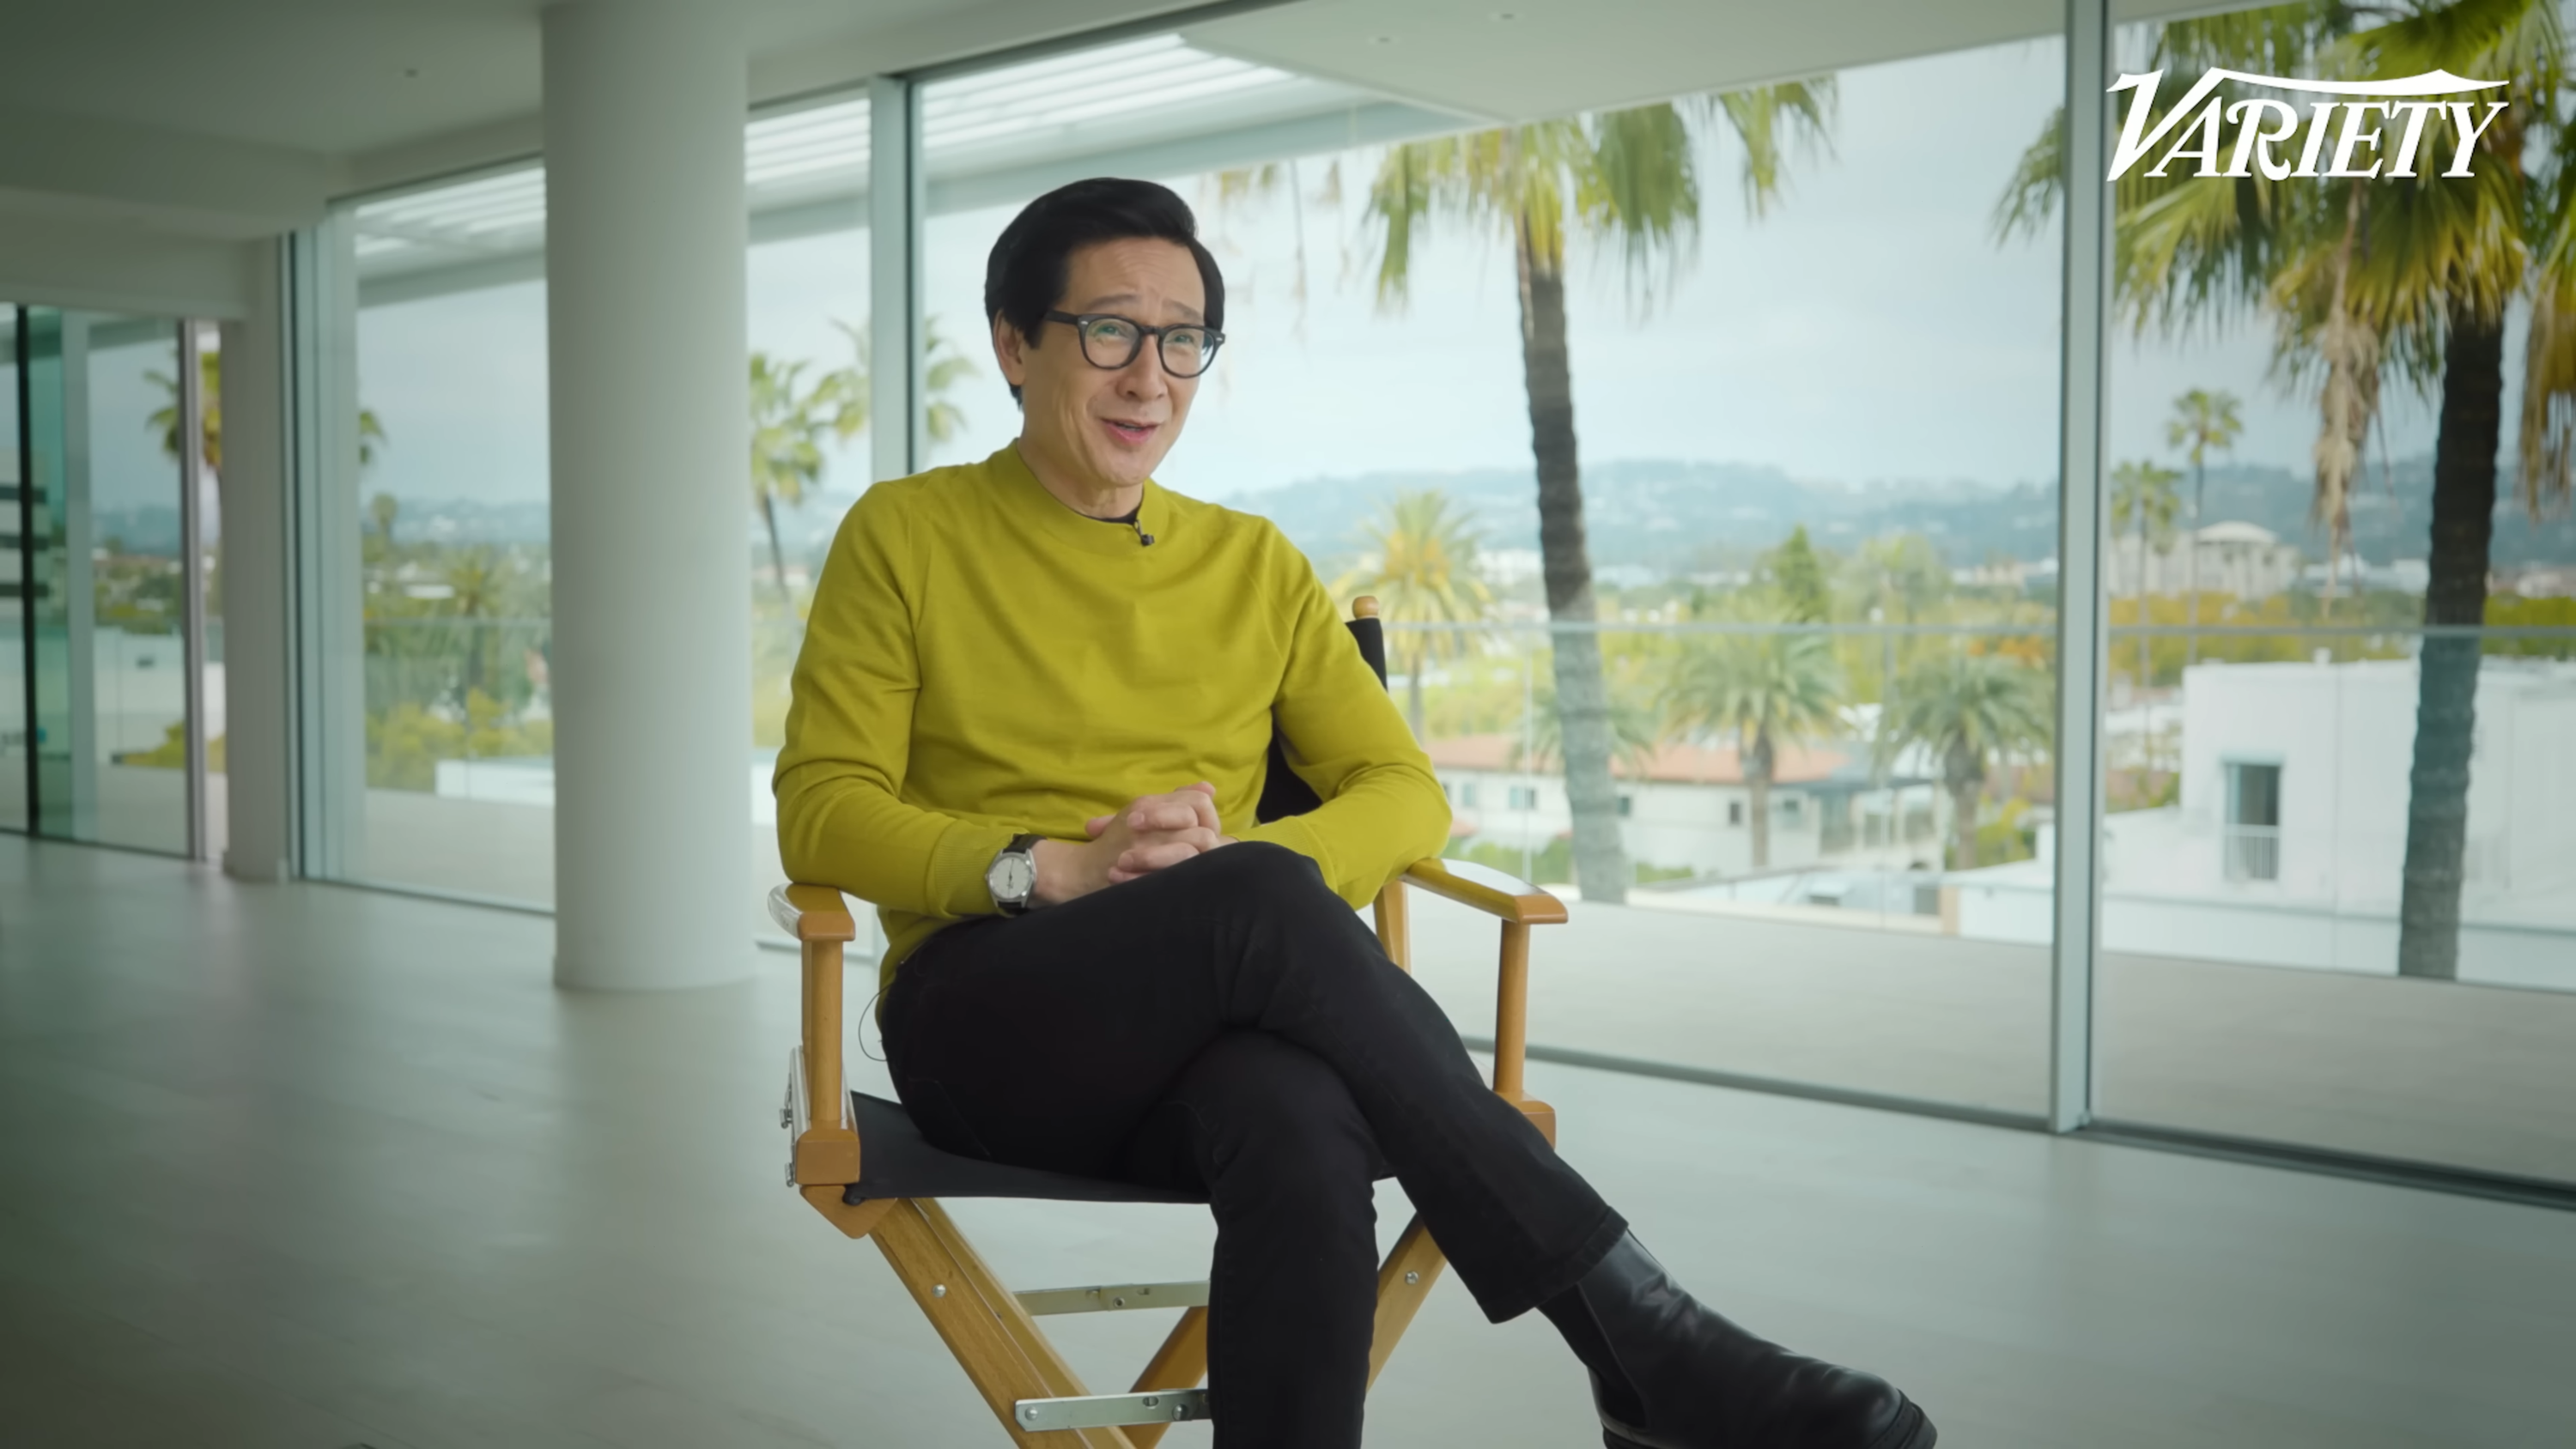 Ke Huy sitting in a director&#x27;s chair during his Variety interview in a room with floor-to-ceiling windows. There are houses and palm trees outside